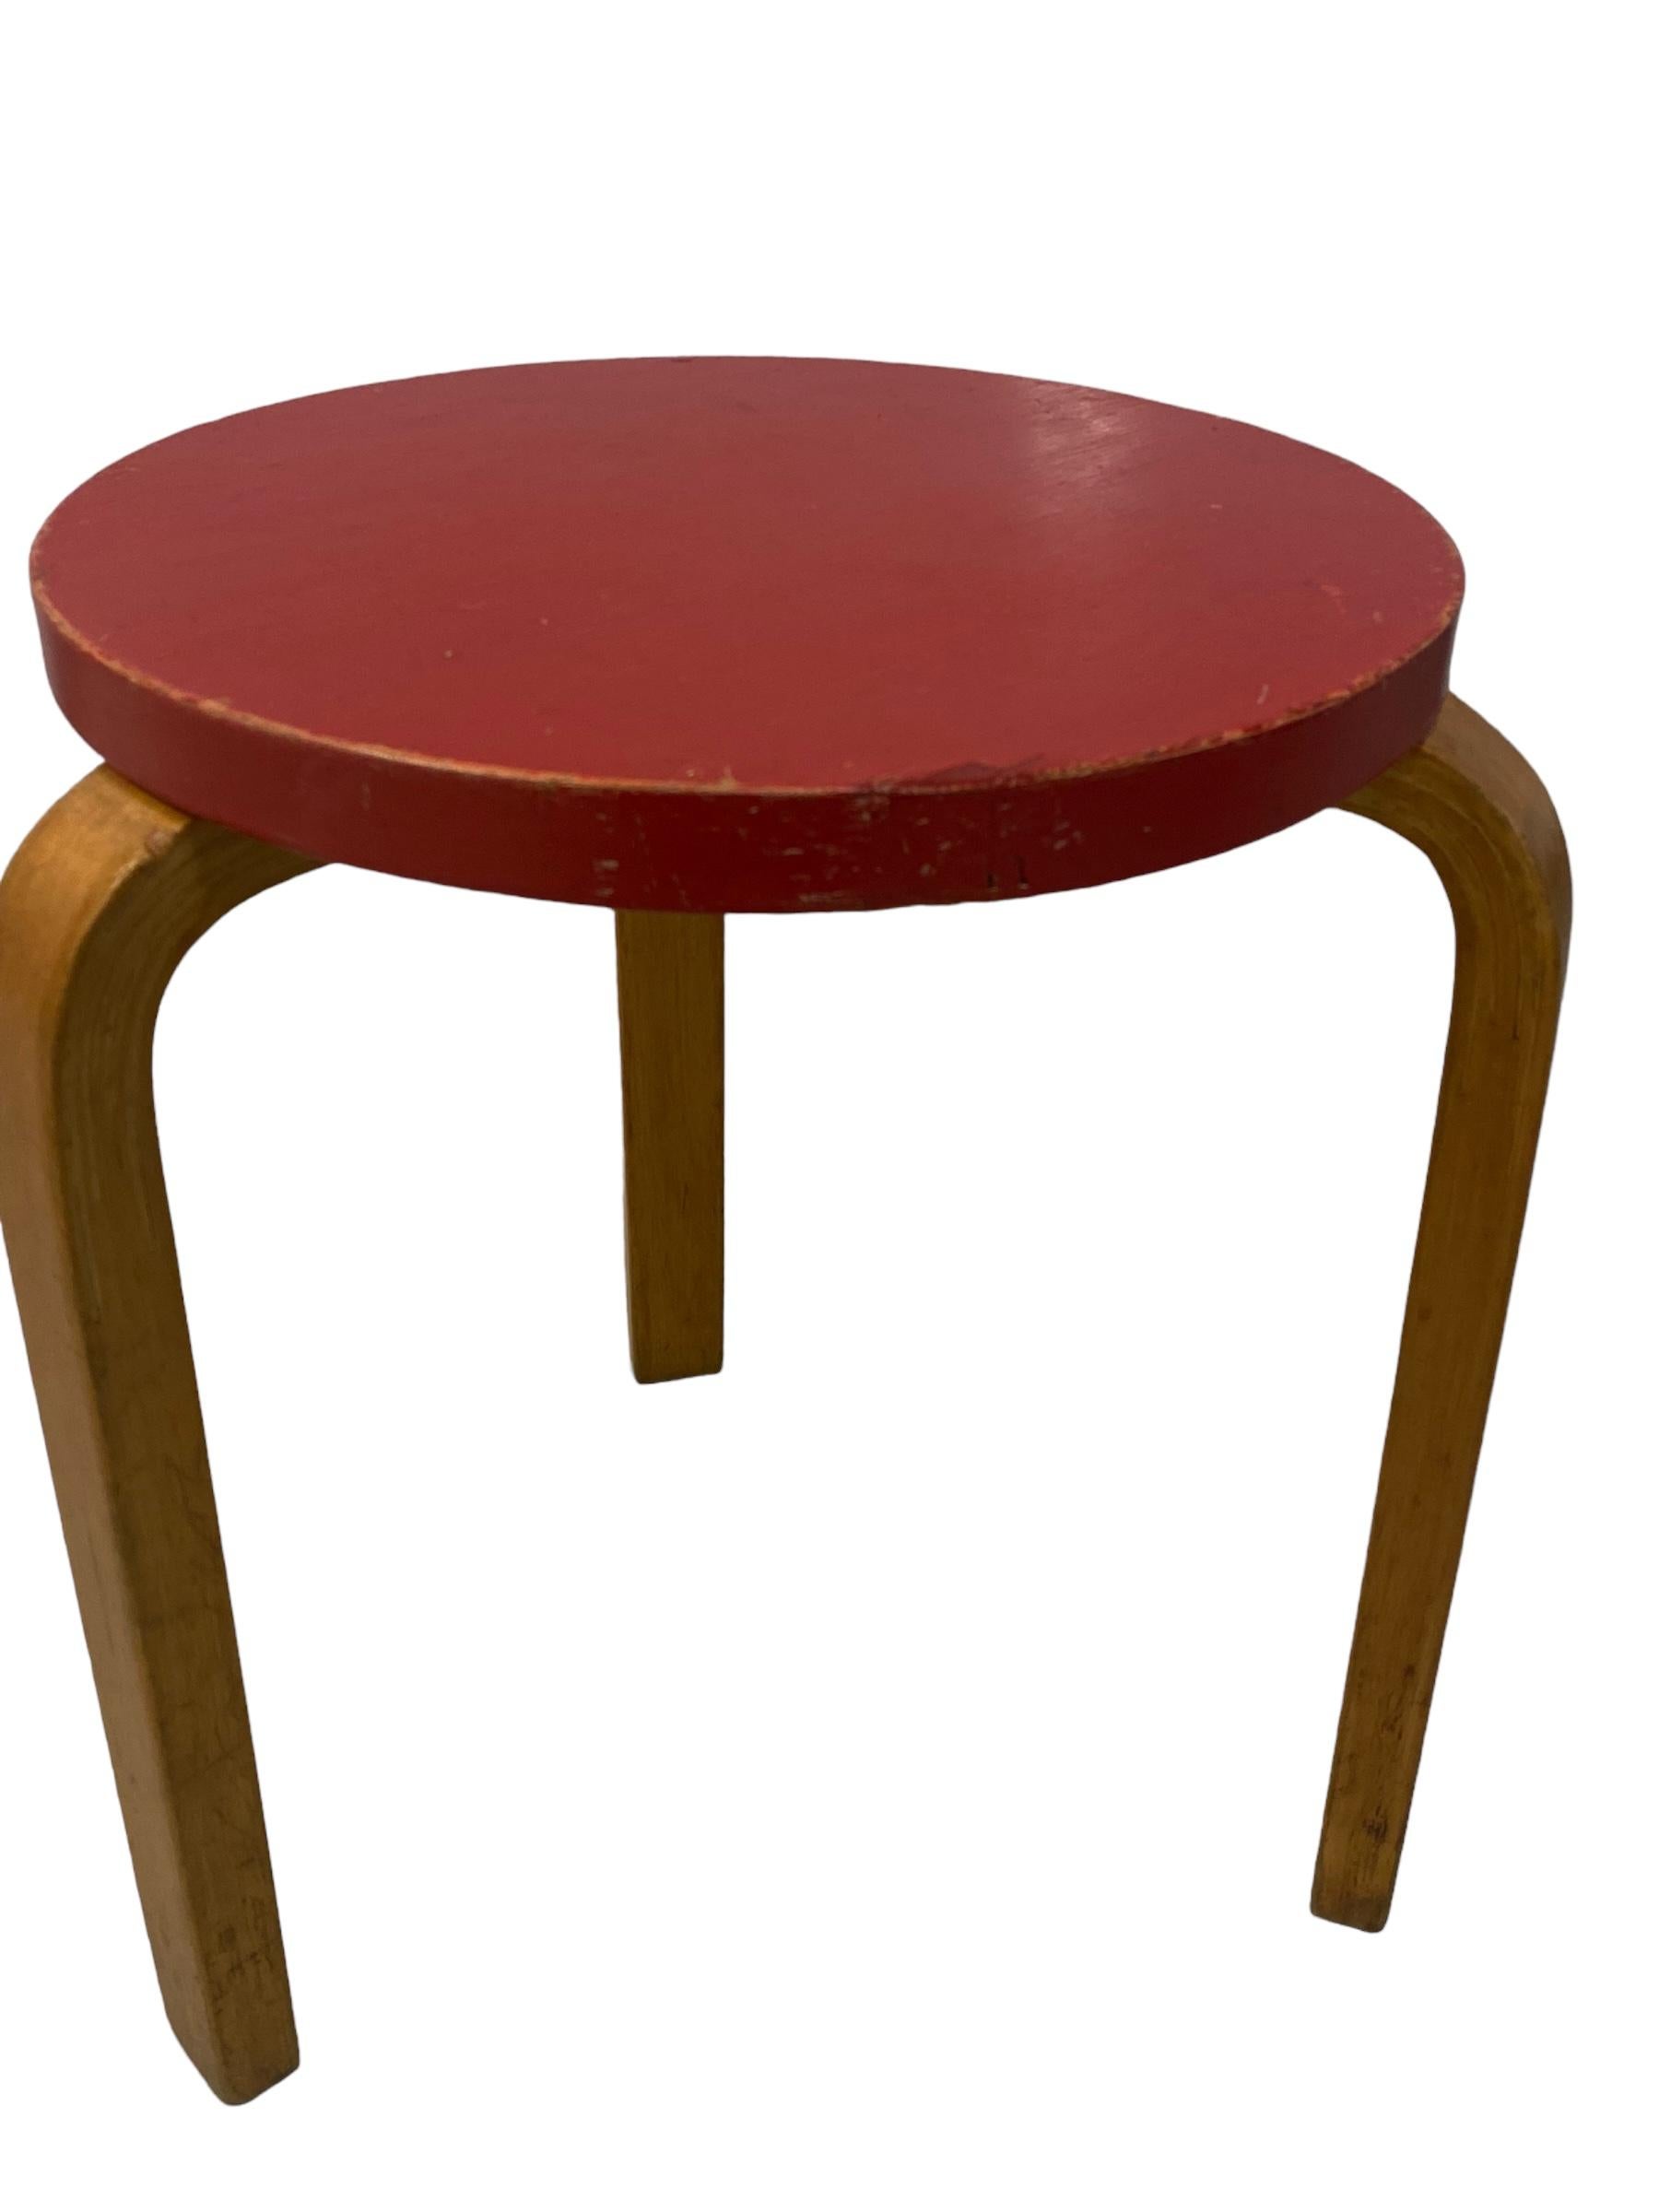 An iconic red model 60 stool in birch and beautiful patina. Designed by Alvar Aalto for Artek in the 1940s, this design has definitely stood the test of time, as it is still in production and still one of the most popular among consumers. The model